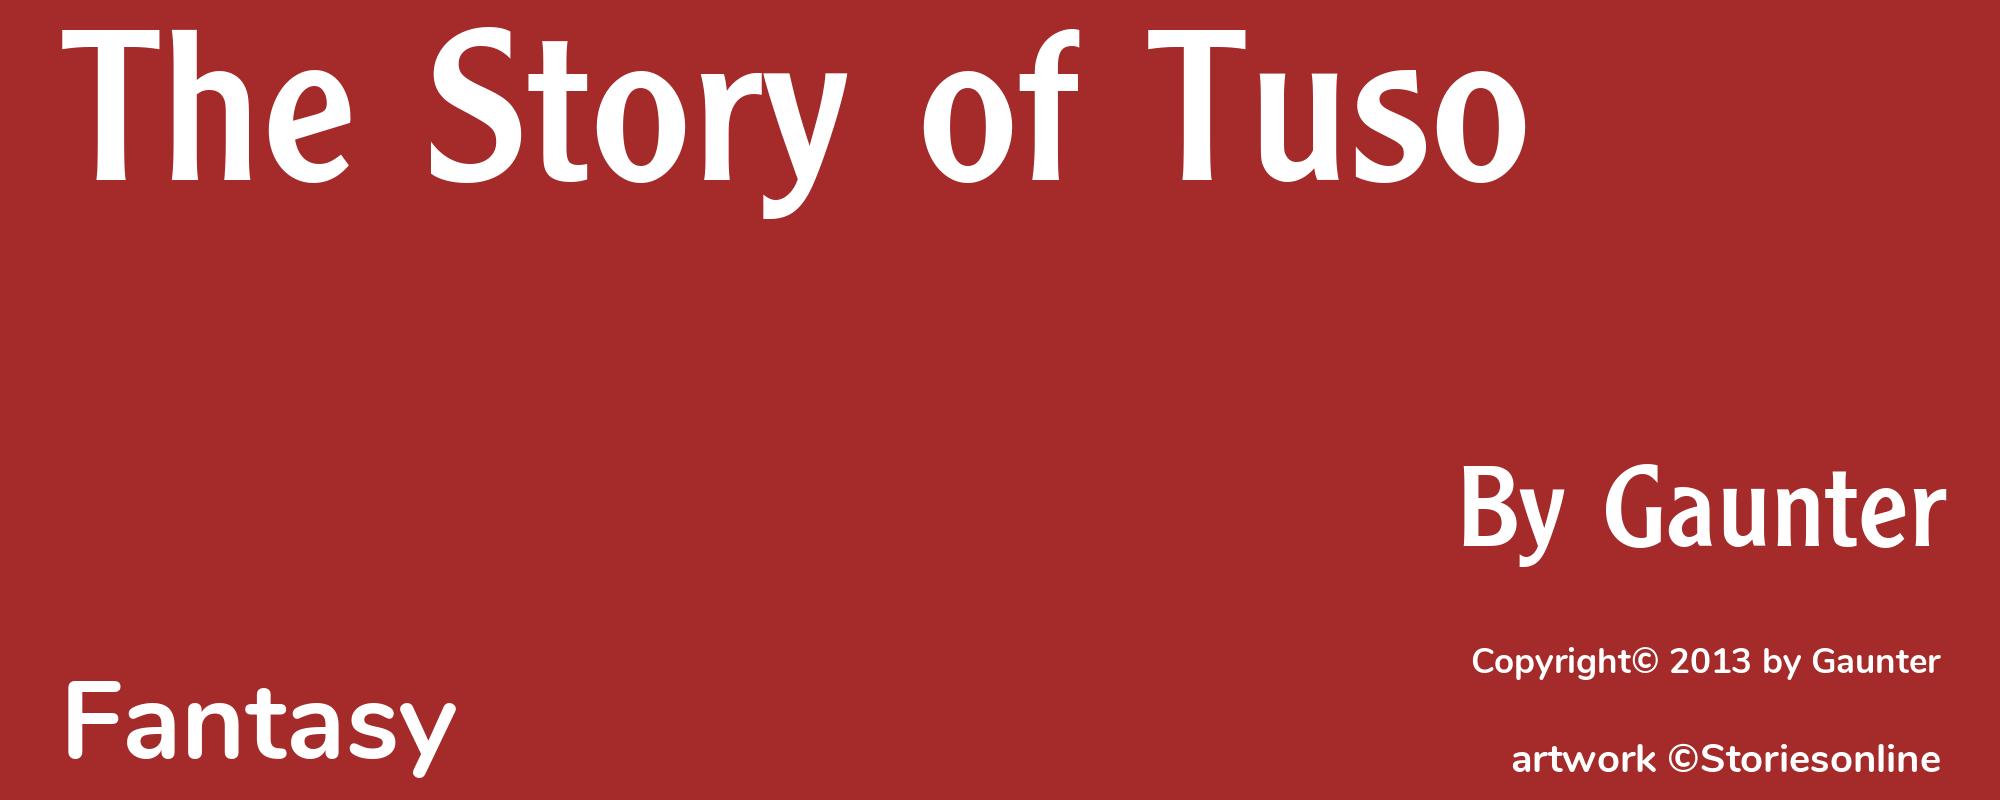 The Story of Tuso - Cover